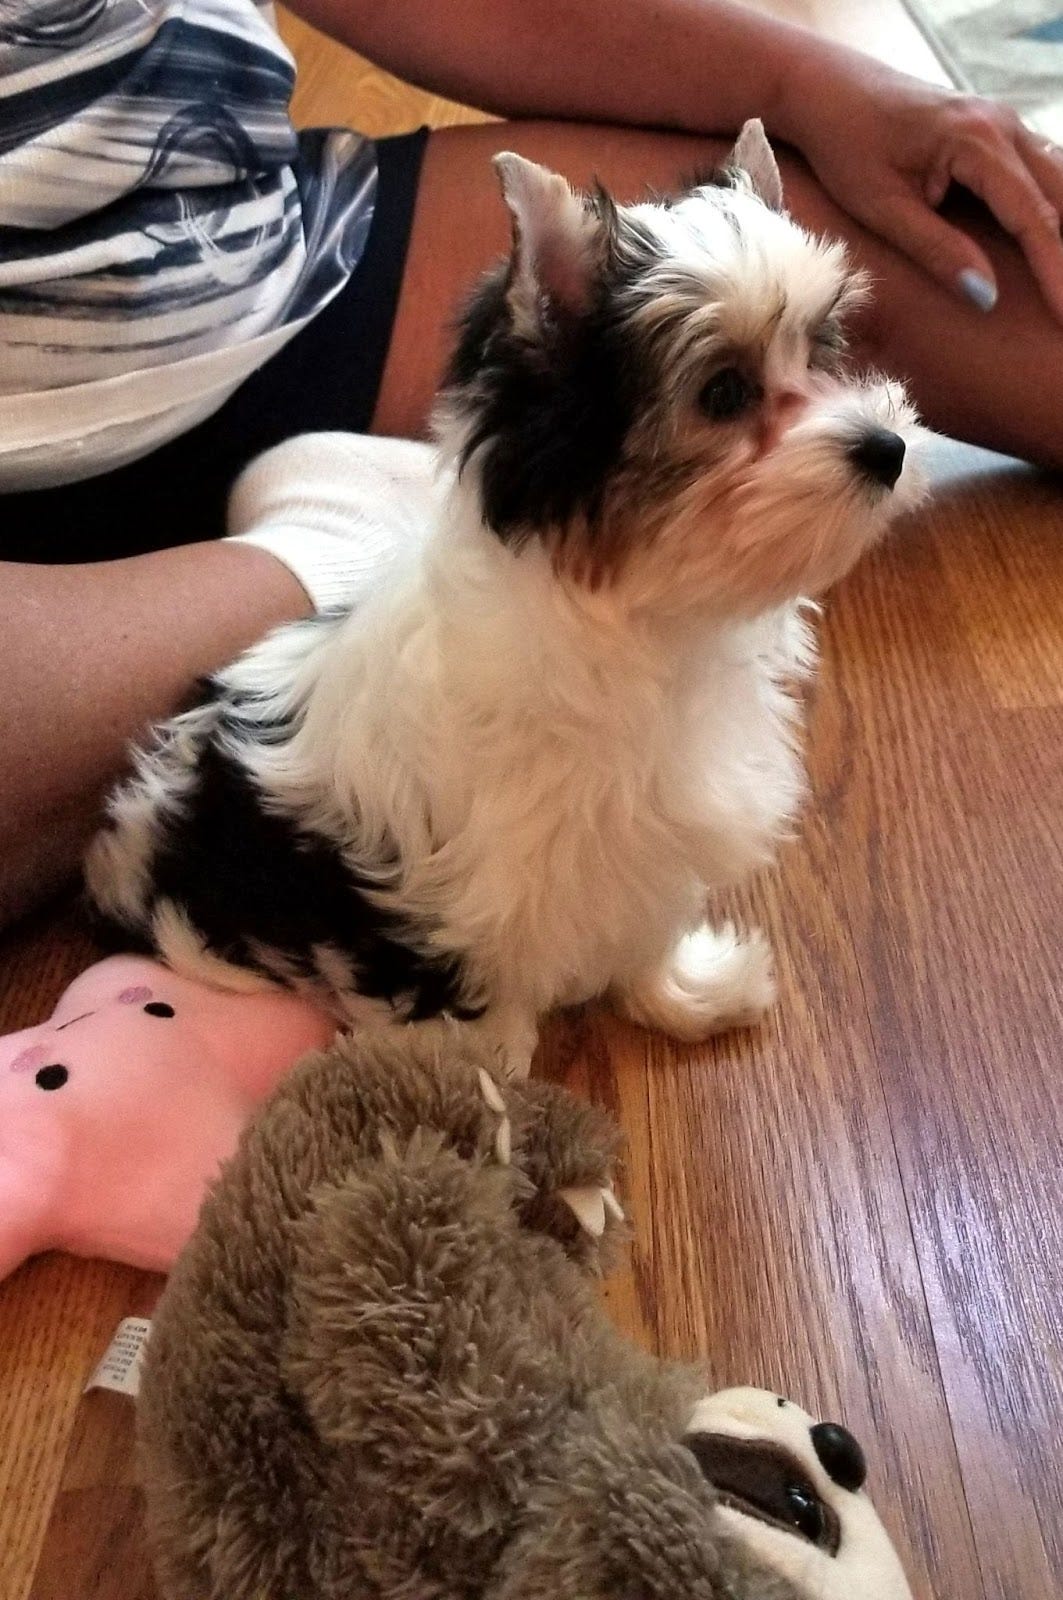 Puppy on the floor next to woman and toys